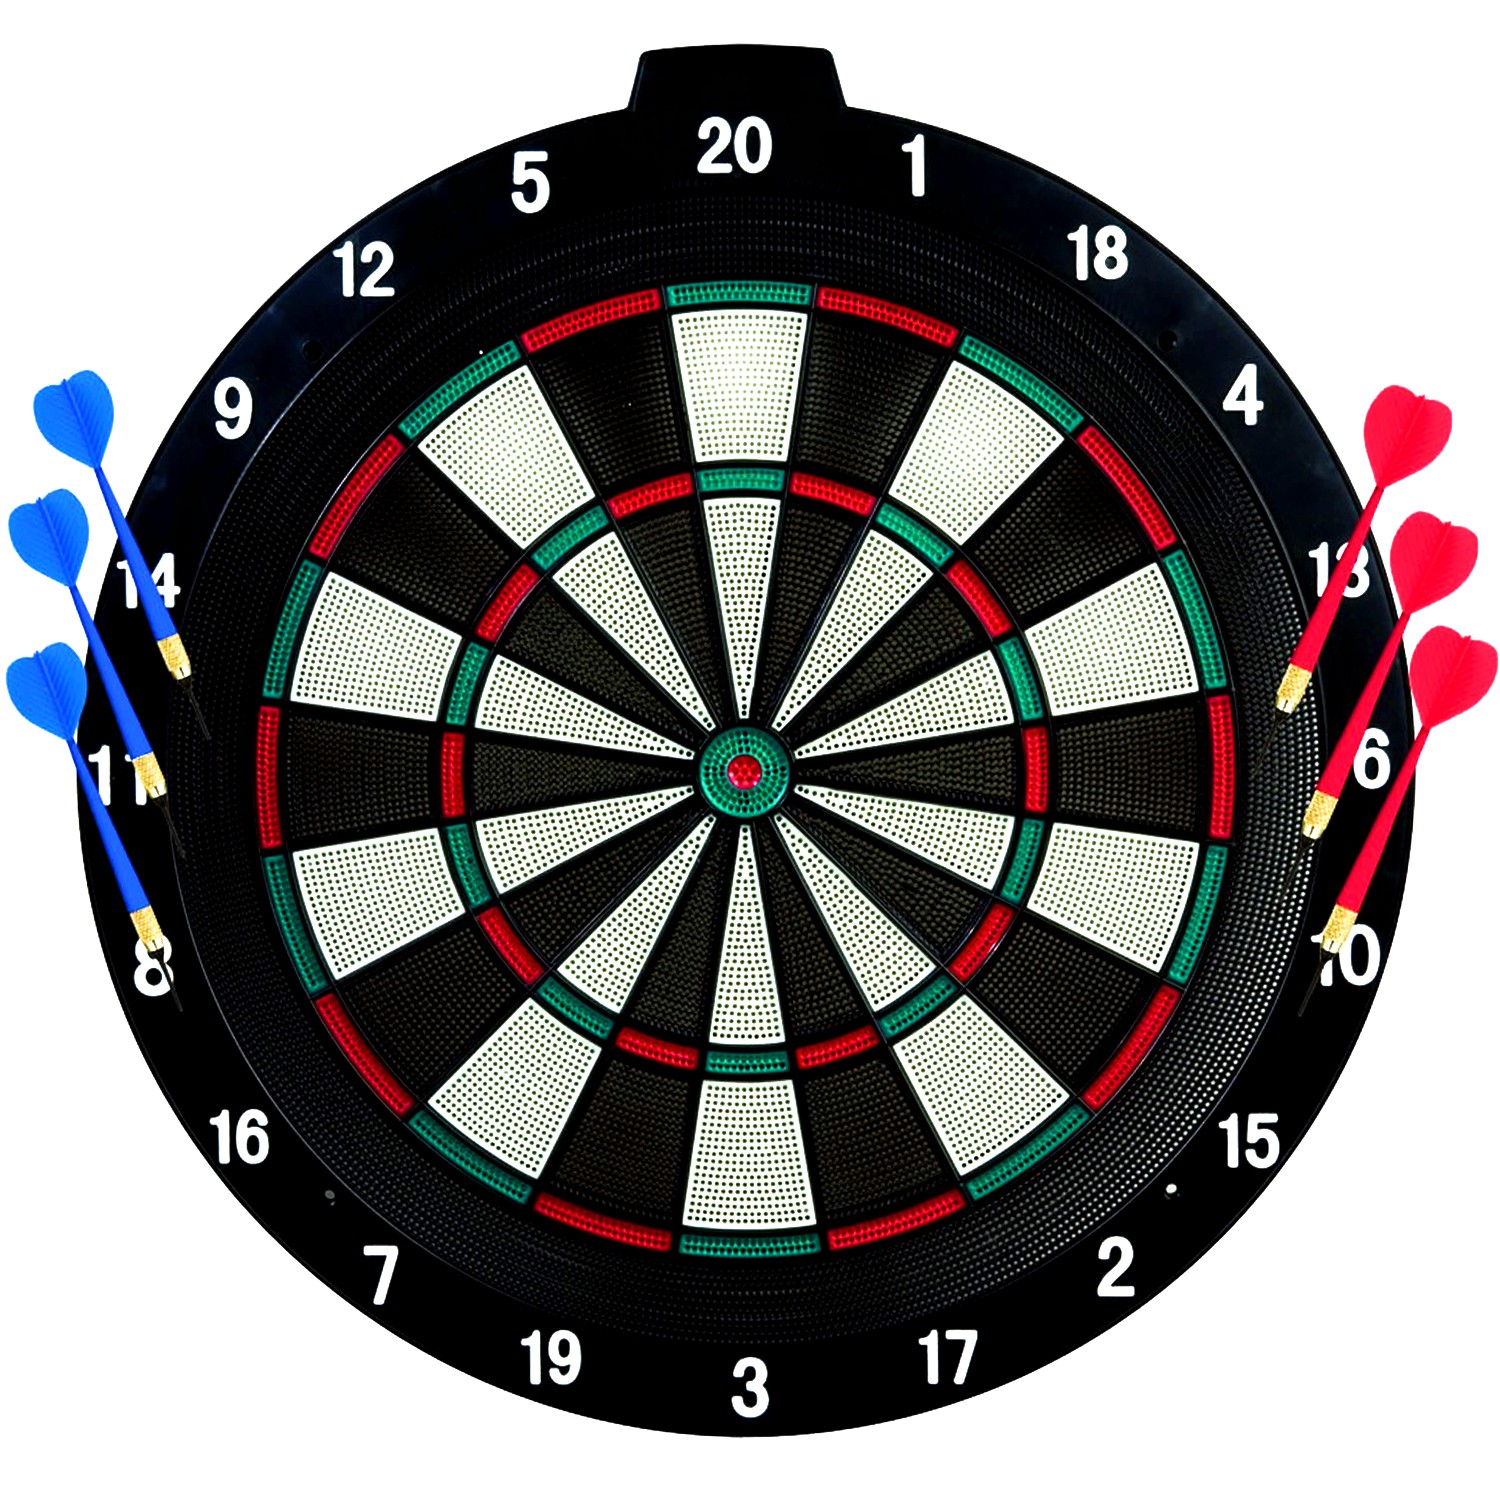 Our soft tip dartboard is a fun, safe way to play darts with the whole fami...